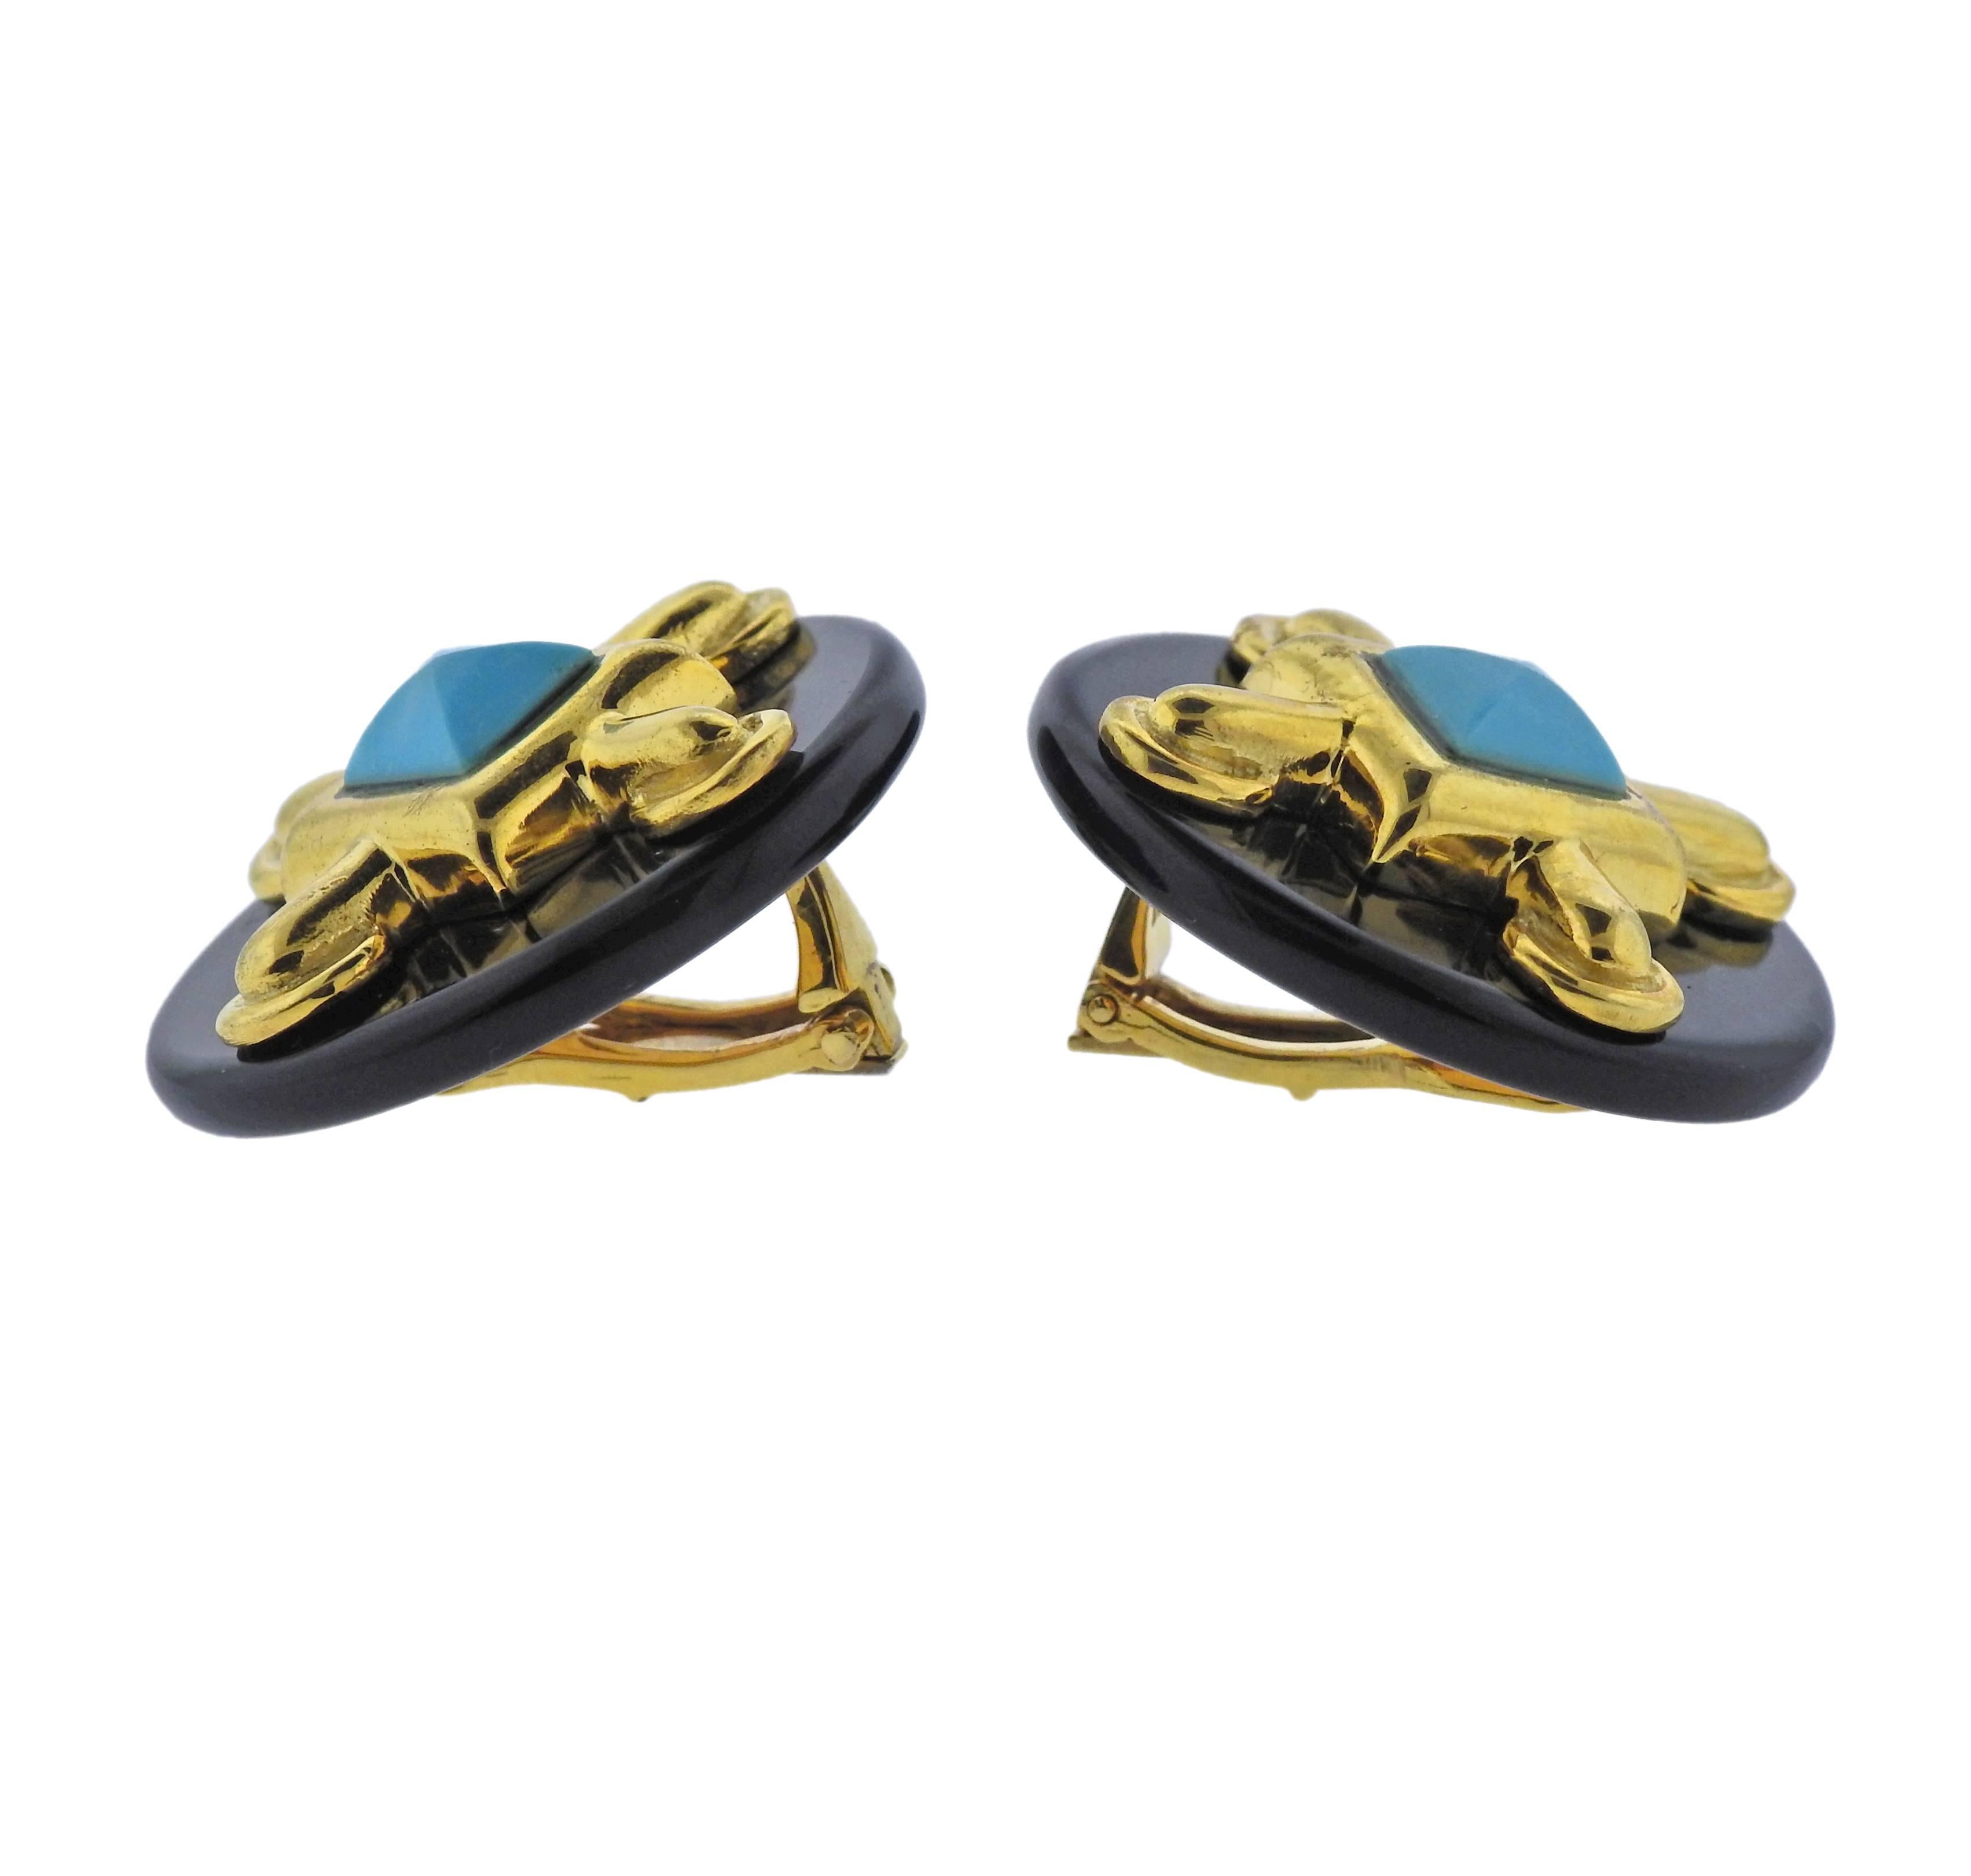 Pair of 18k yellow gold earrings, designed by Aldo Cippulo in circa 1973, set with onyx top and turquoise. Earrings are 27mm in diameter, weigh 32.1 grams. Marked:  A.Cipullo, 1973. 